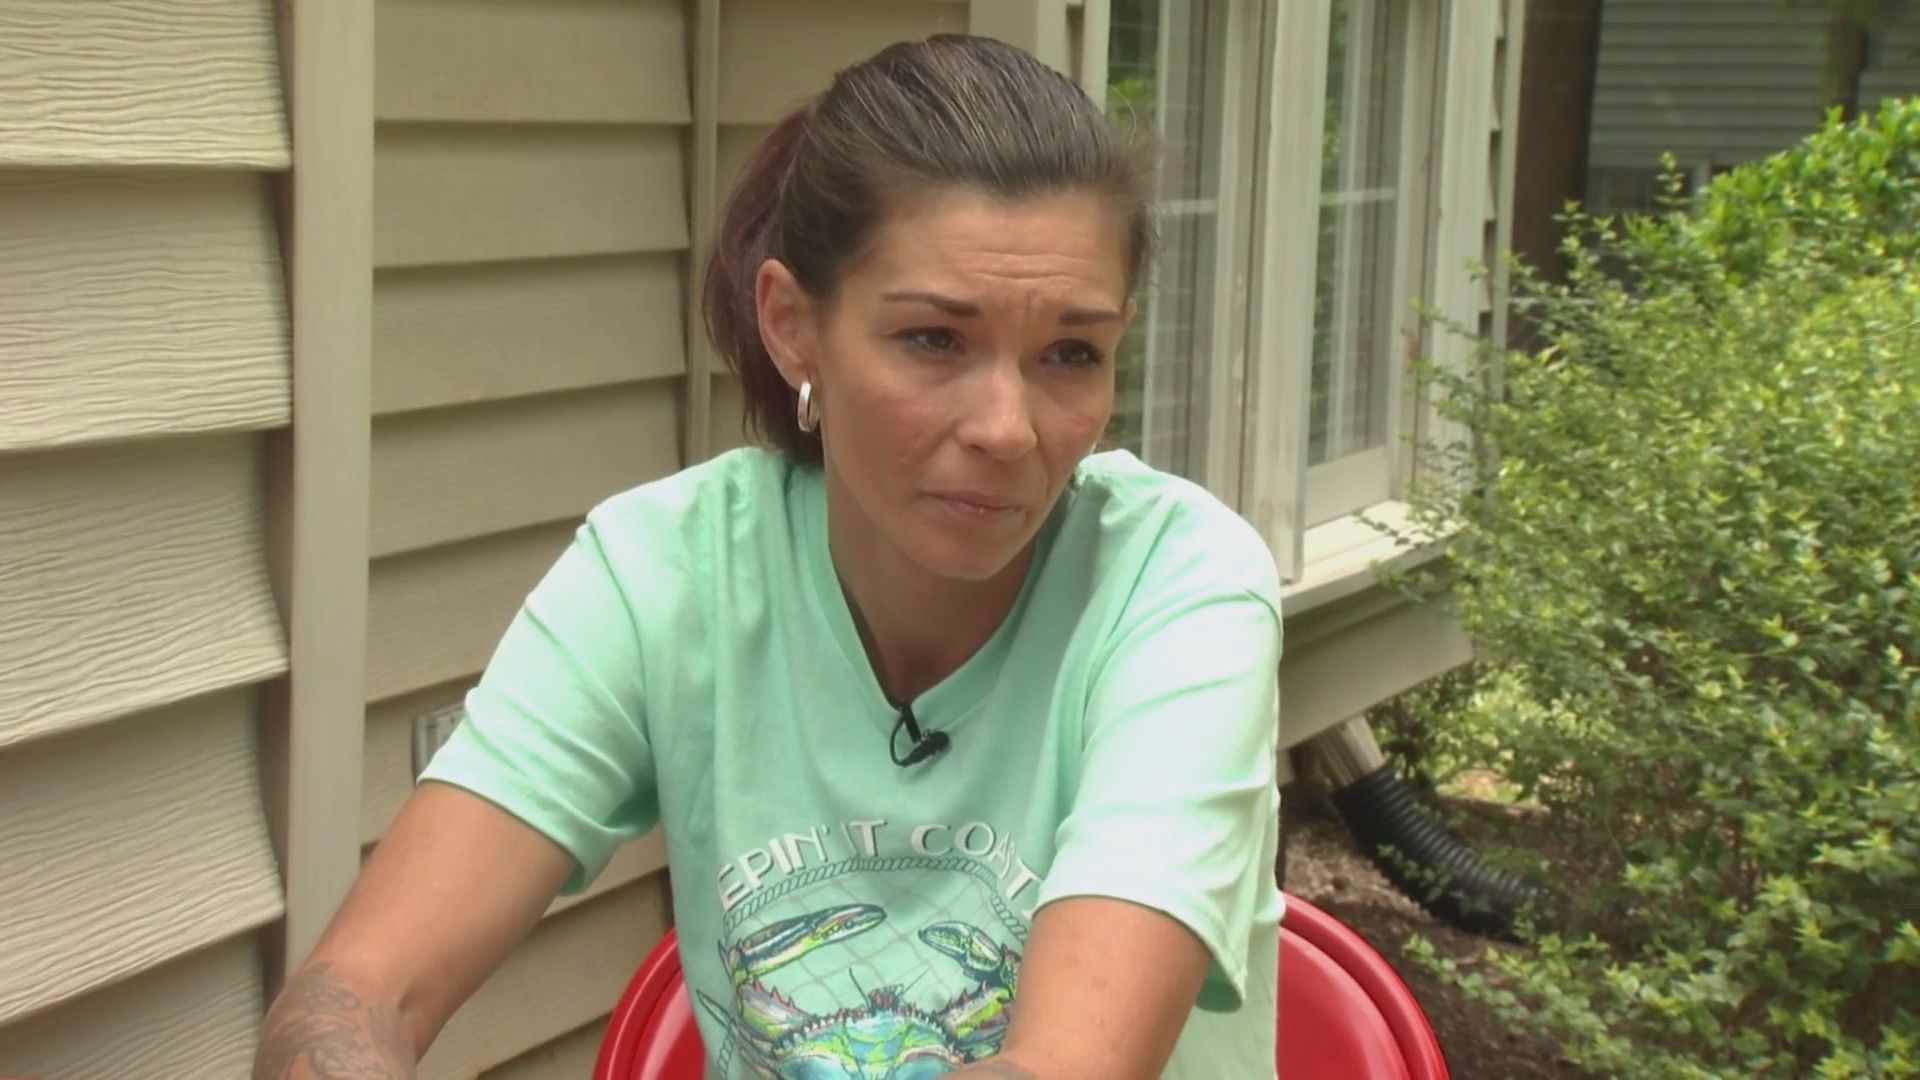 A mother who says she was standing up for her 3rd-grade son and the seemingly constant bullying toward him ended up getting arrested.

Jamie Rathburn told WSPA-TV she was sick and tired of what Blake was going through at school she started taking notes of each incident. They covered up at least a page.

"He got hit, kicked, hit with a computer, he was shoved, he was jerked off a slide from behind," Rathburn said.